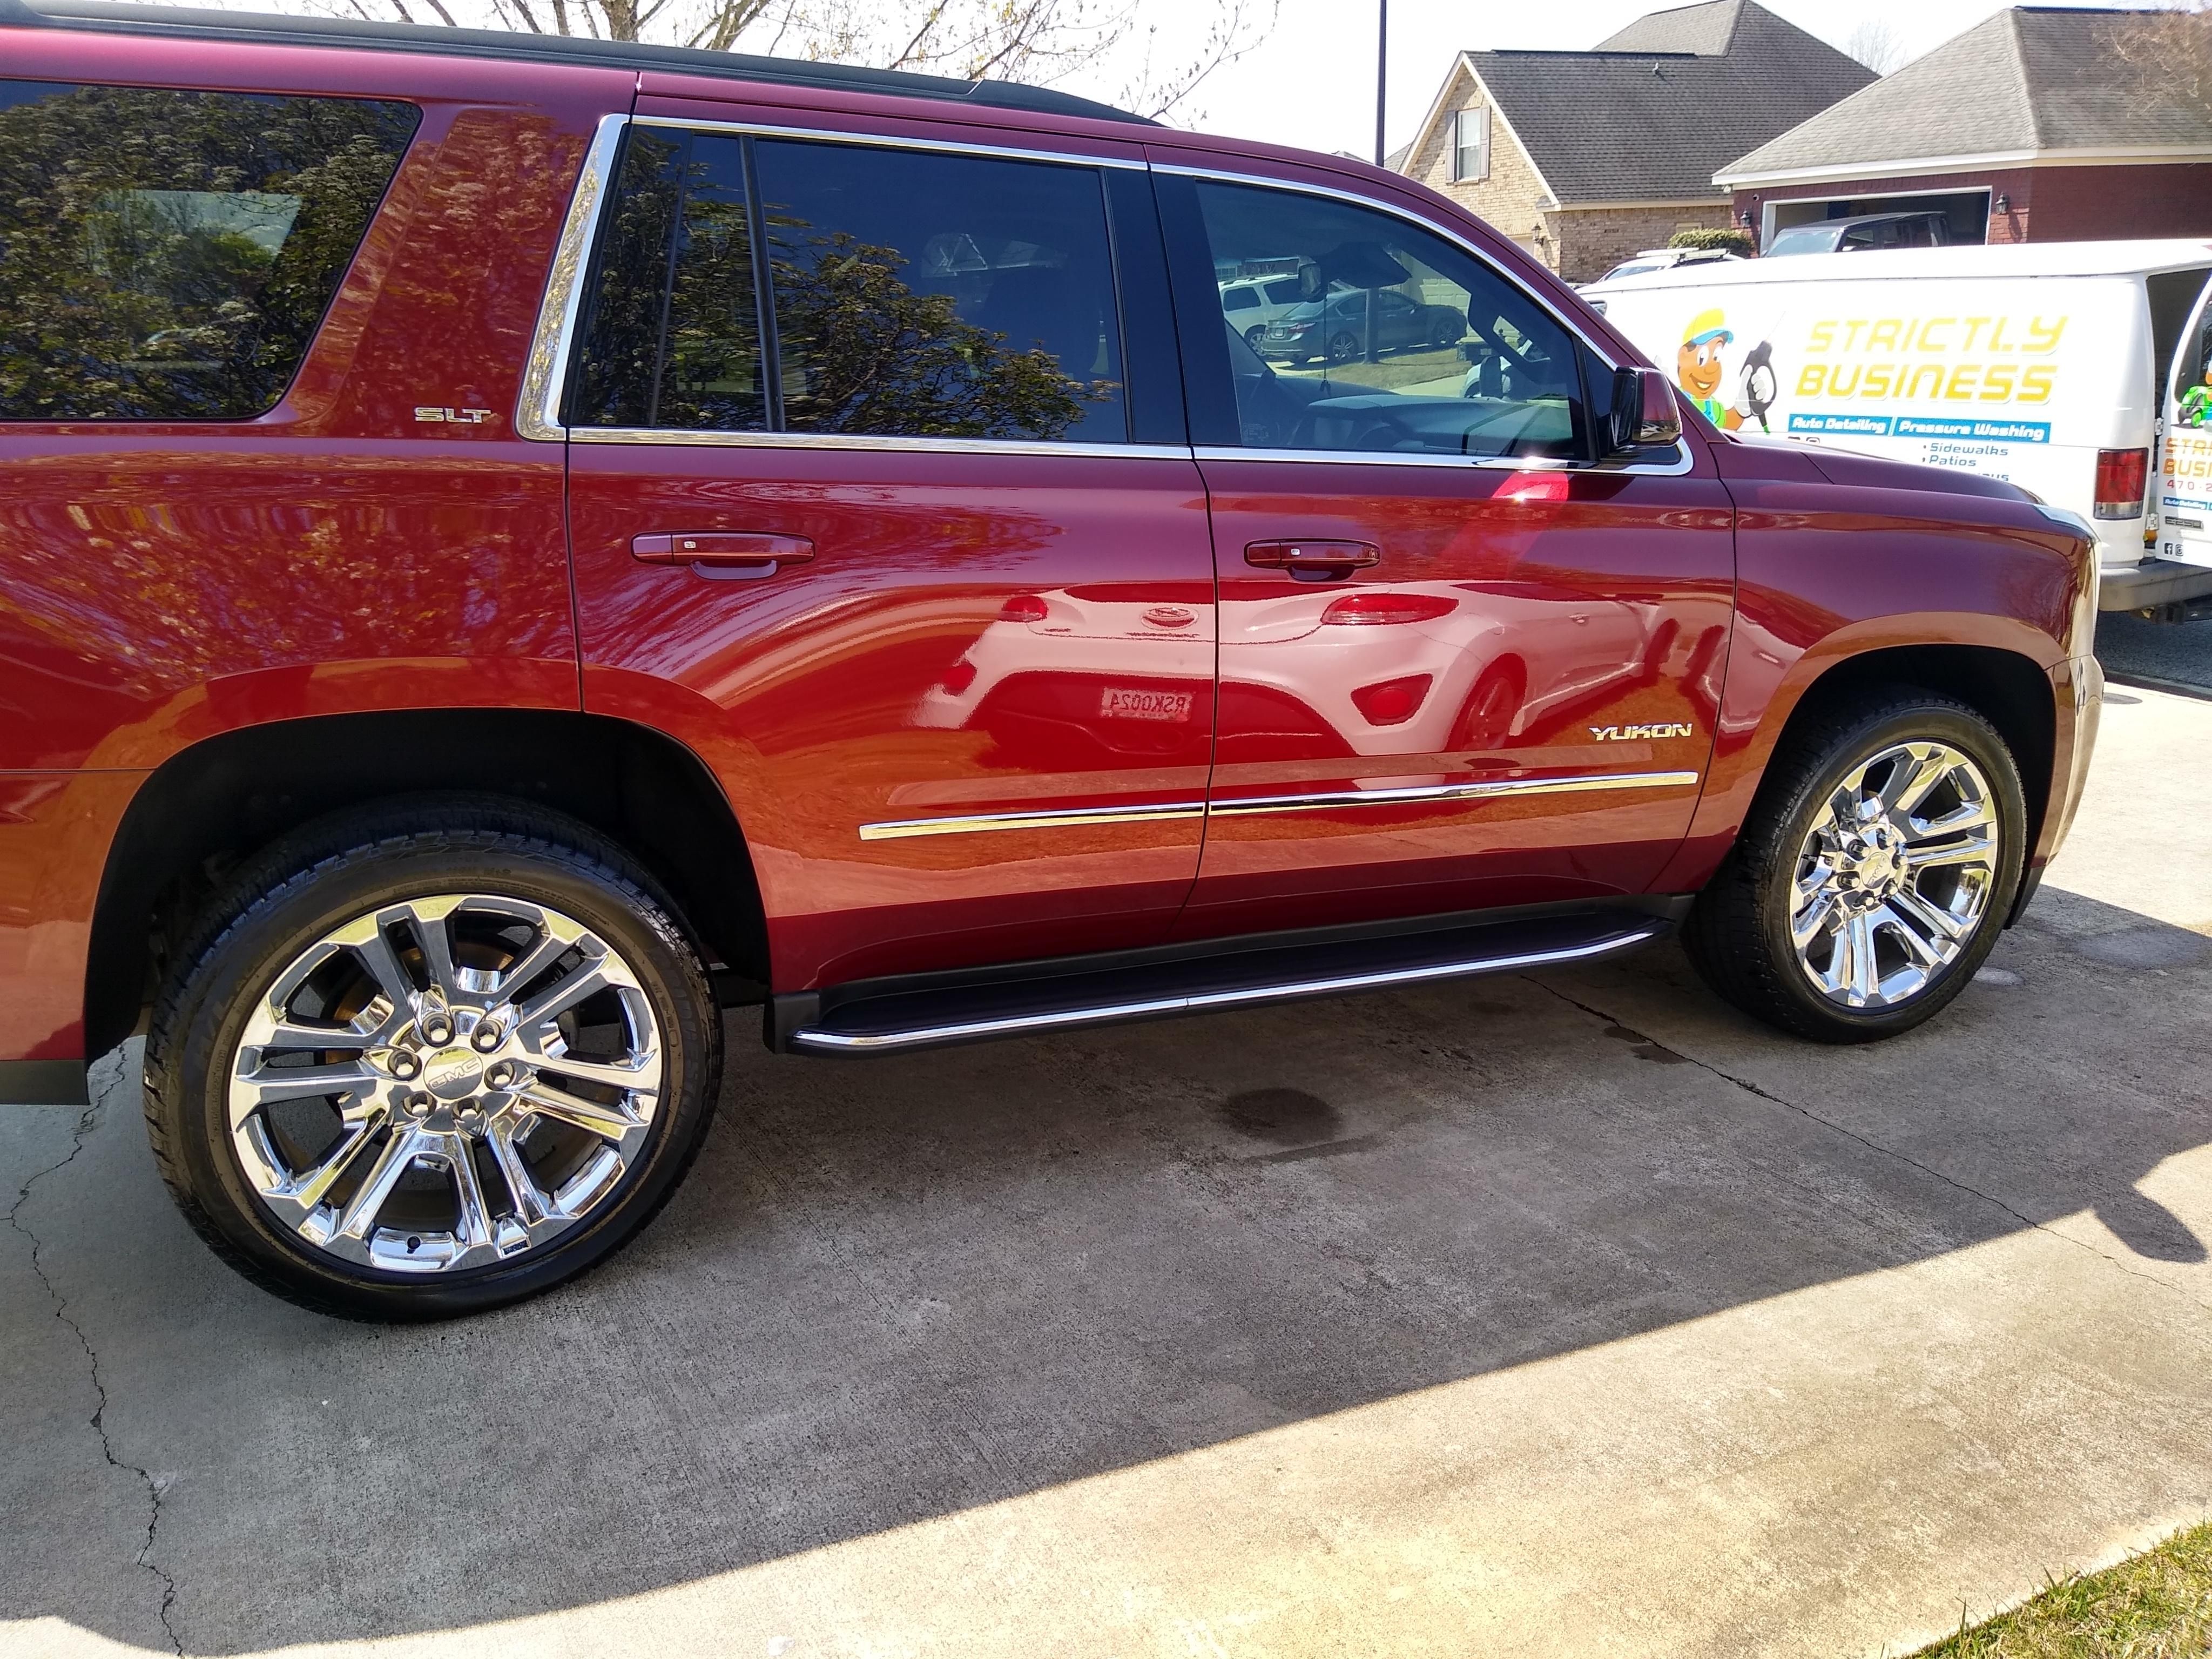  for RH Strictly Business Auto Detailing and Pressure Washing in Warner Robins, GA